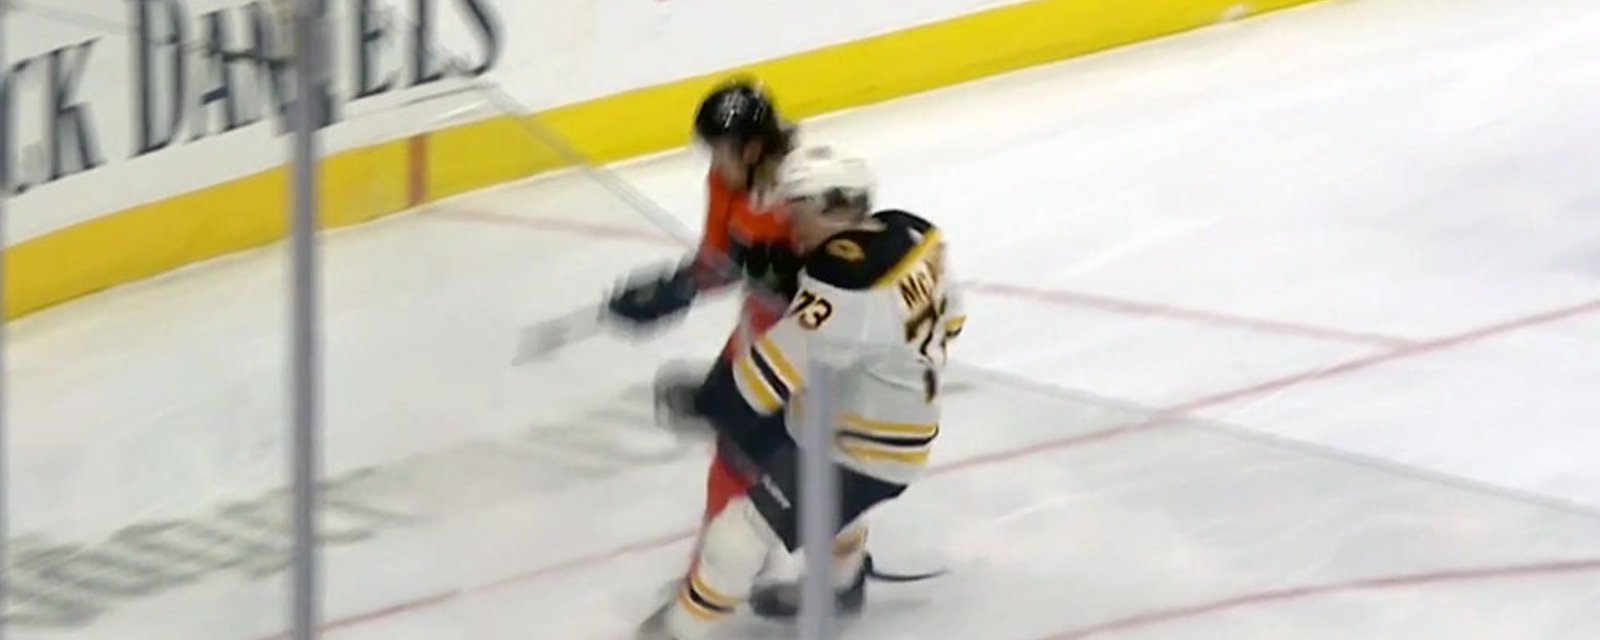 Konency goes unpenalized for a high hit on McAvoy